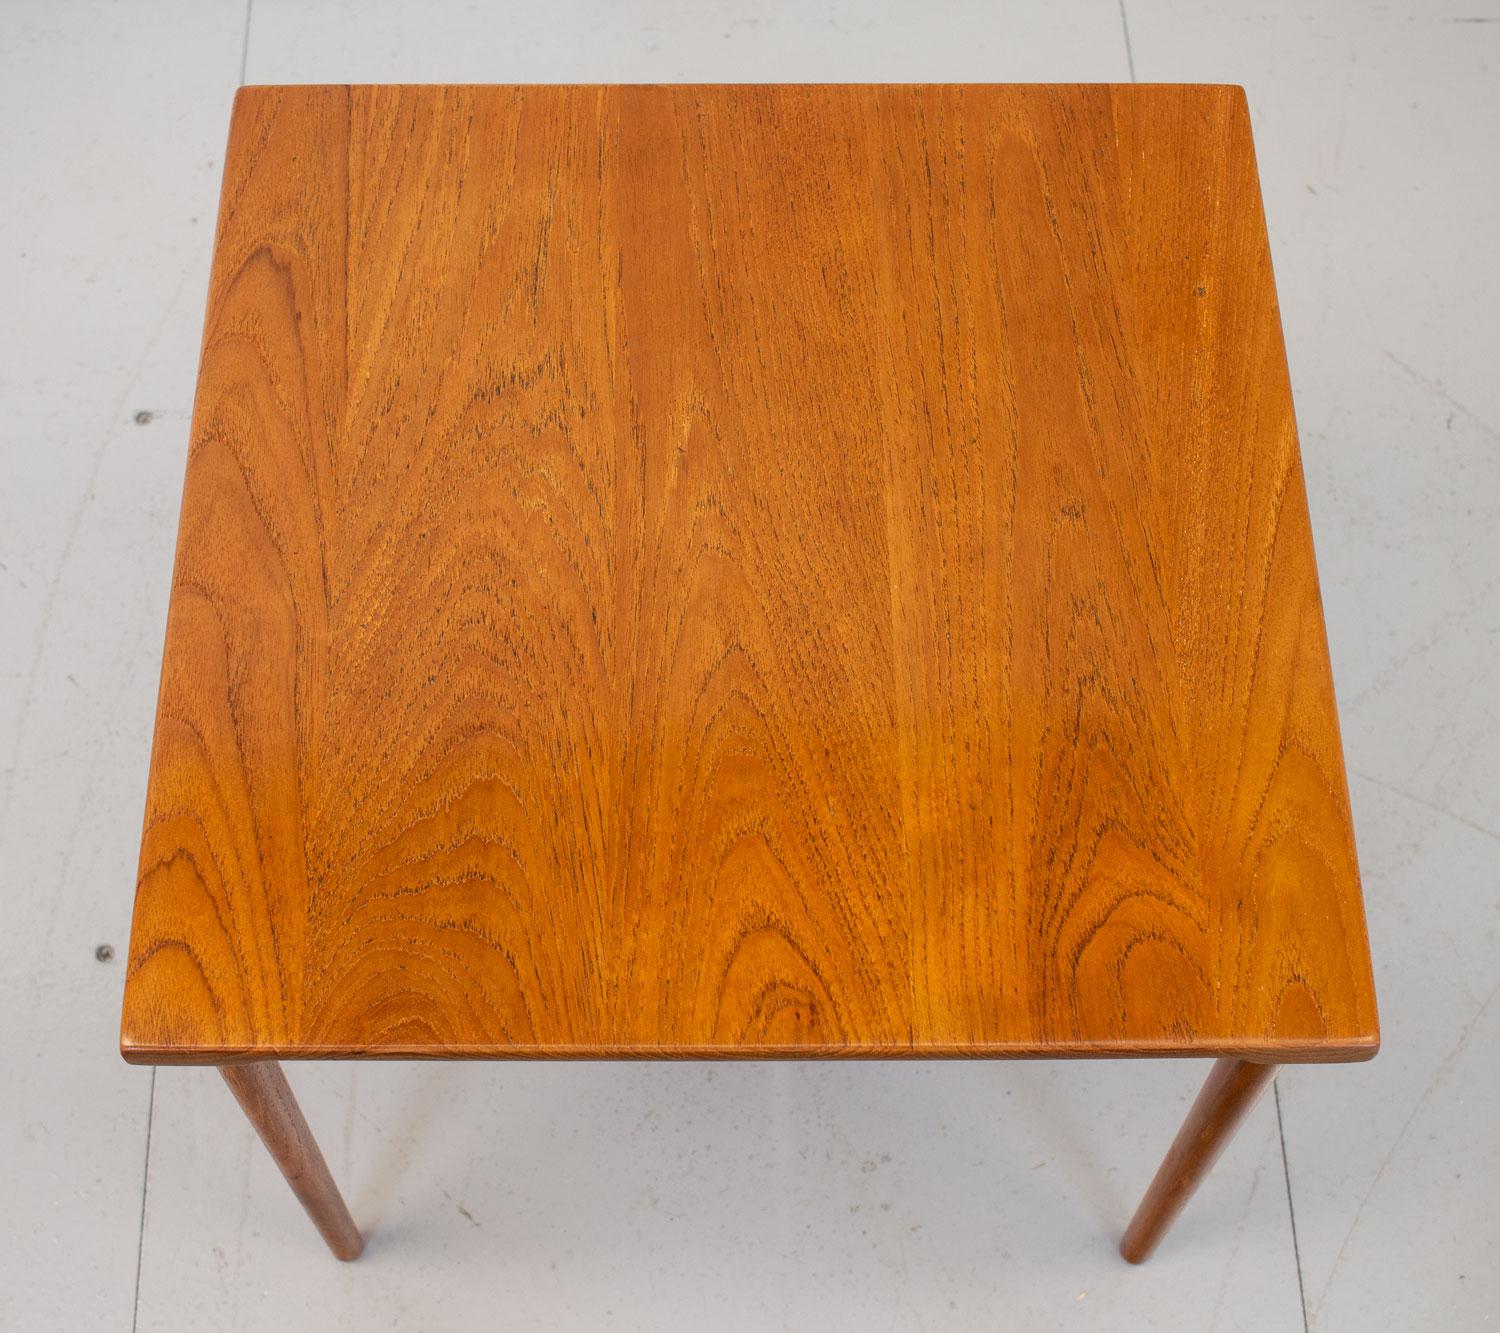 Danish model FD544 occasional side table by Edvard Kindt-Larsen for Danish manufacturer France & Son. Designed in the late 1950s and made of solid teak with shaped edges and turned legs it can be easily dismantled and flat packed for shipping.